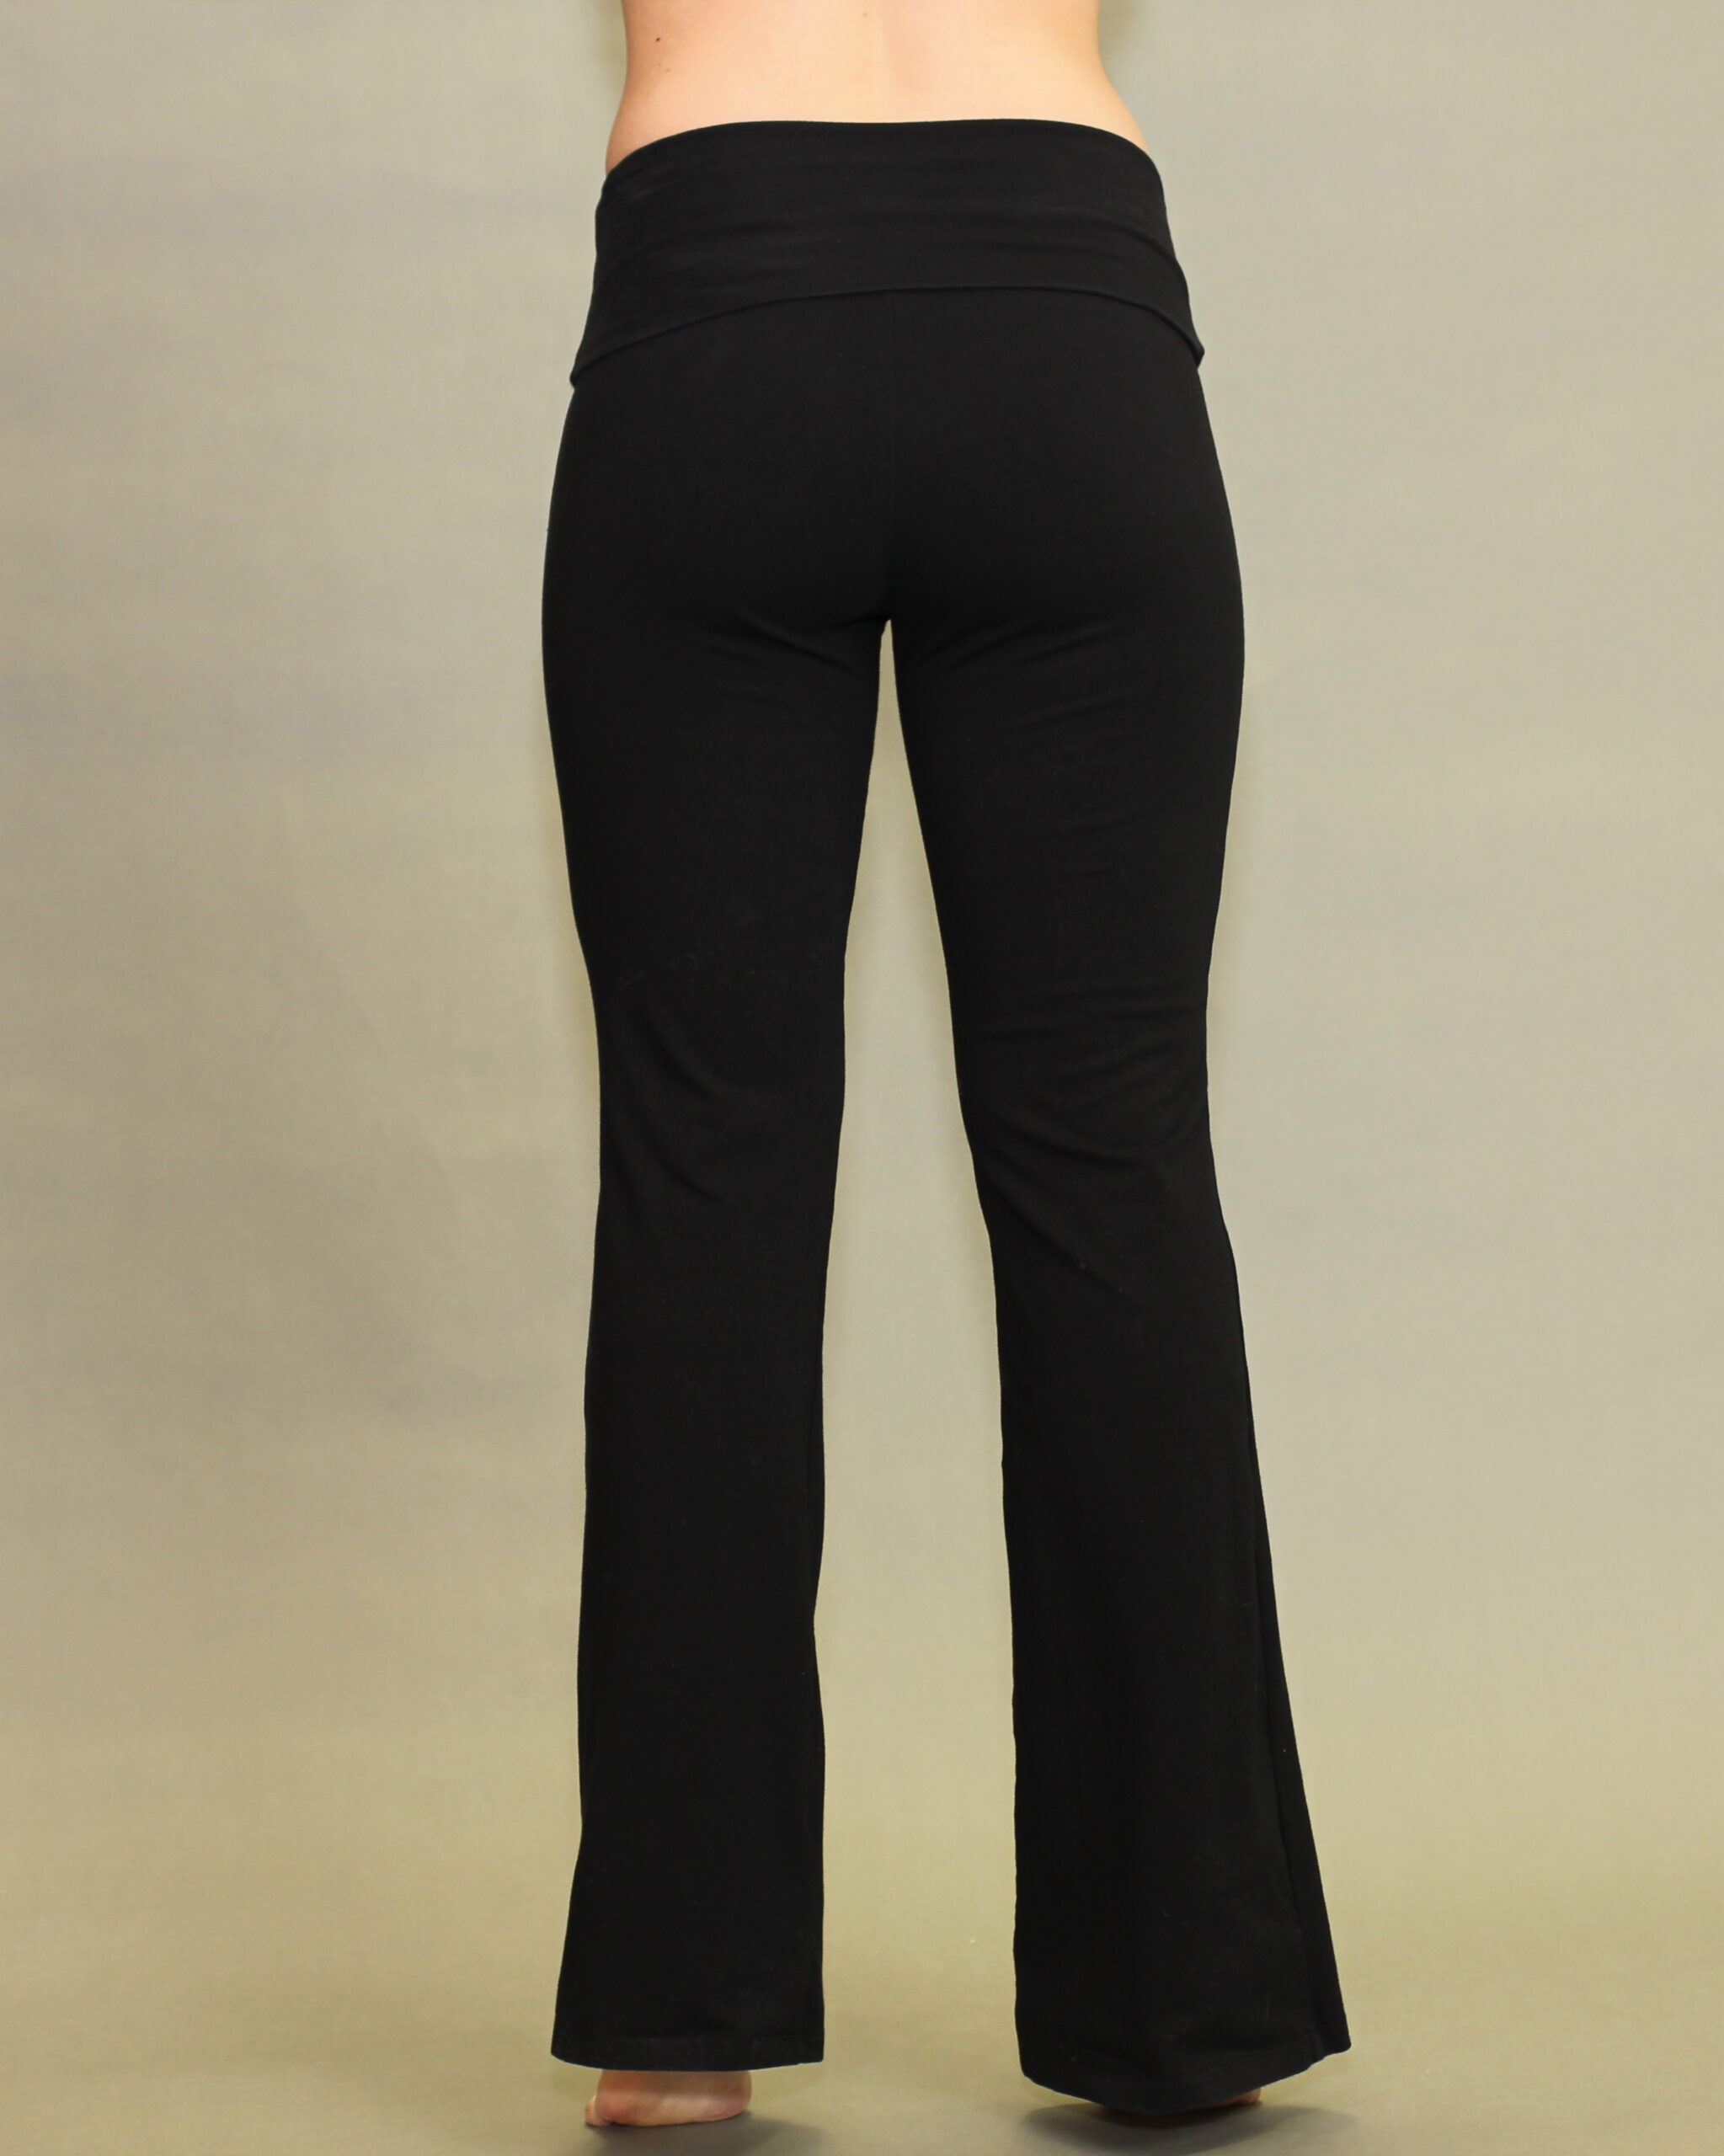 Yoga Pants Stretch Cotton Fold Over High Waist Flare Legging STORE